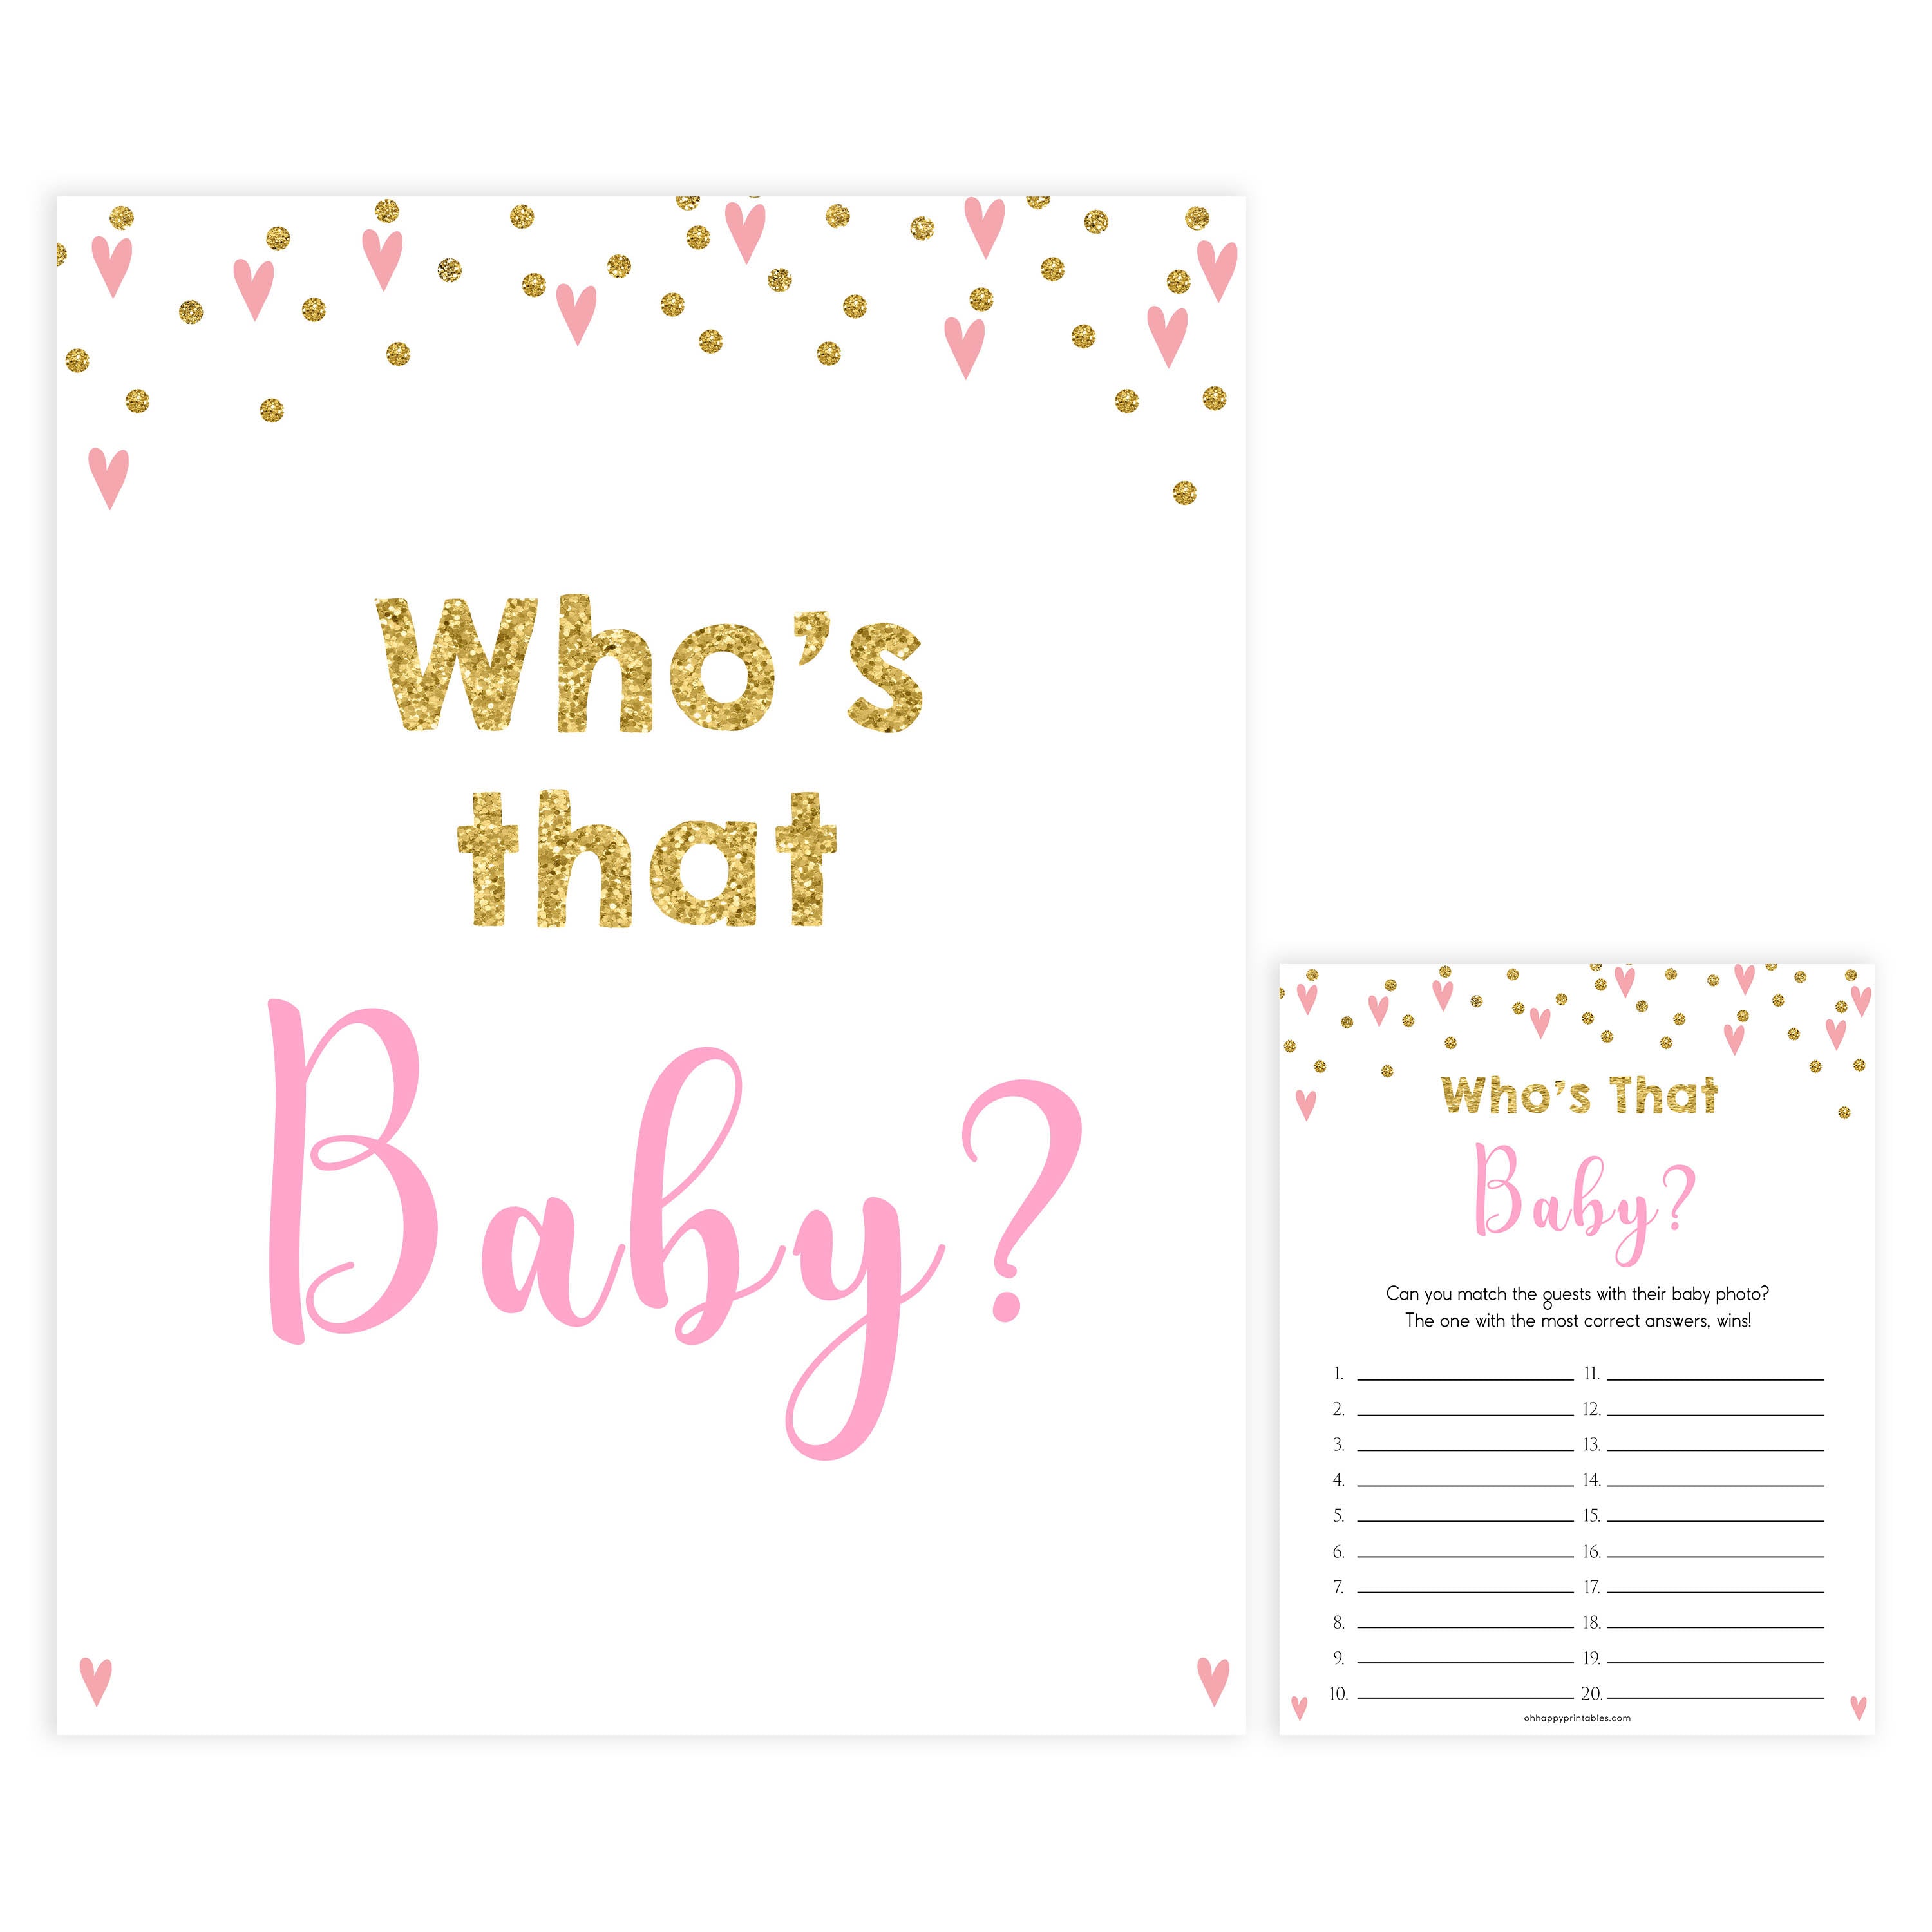 whos that baby game, guess the baby pictures, Printable baby shower games, small pink hearts fun baby games, baby shower games, fun baby shower ideas, top baby shower ideas, gold baby shower, pink hearts baby shower ideas